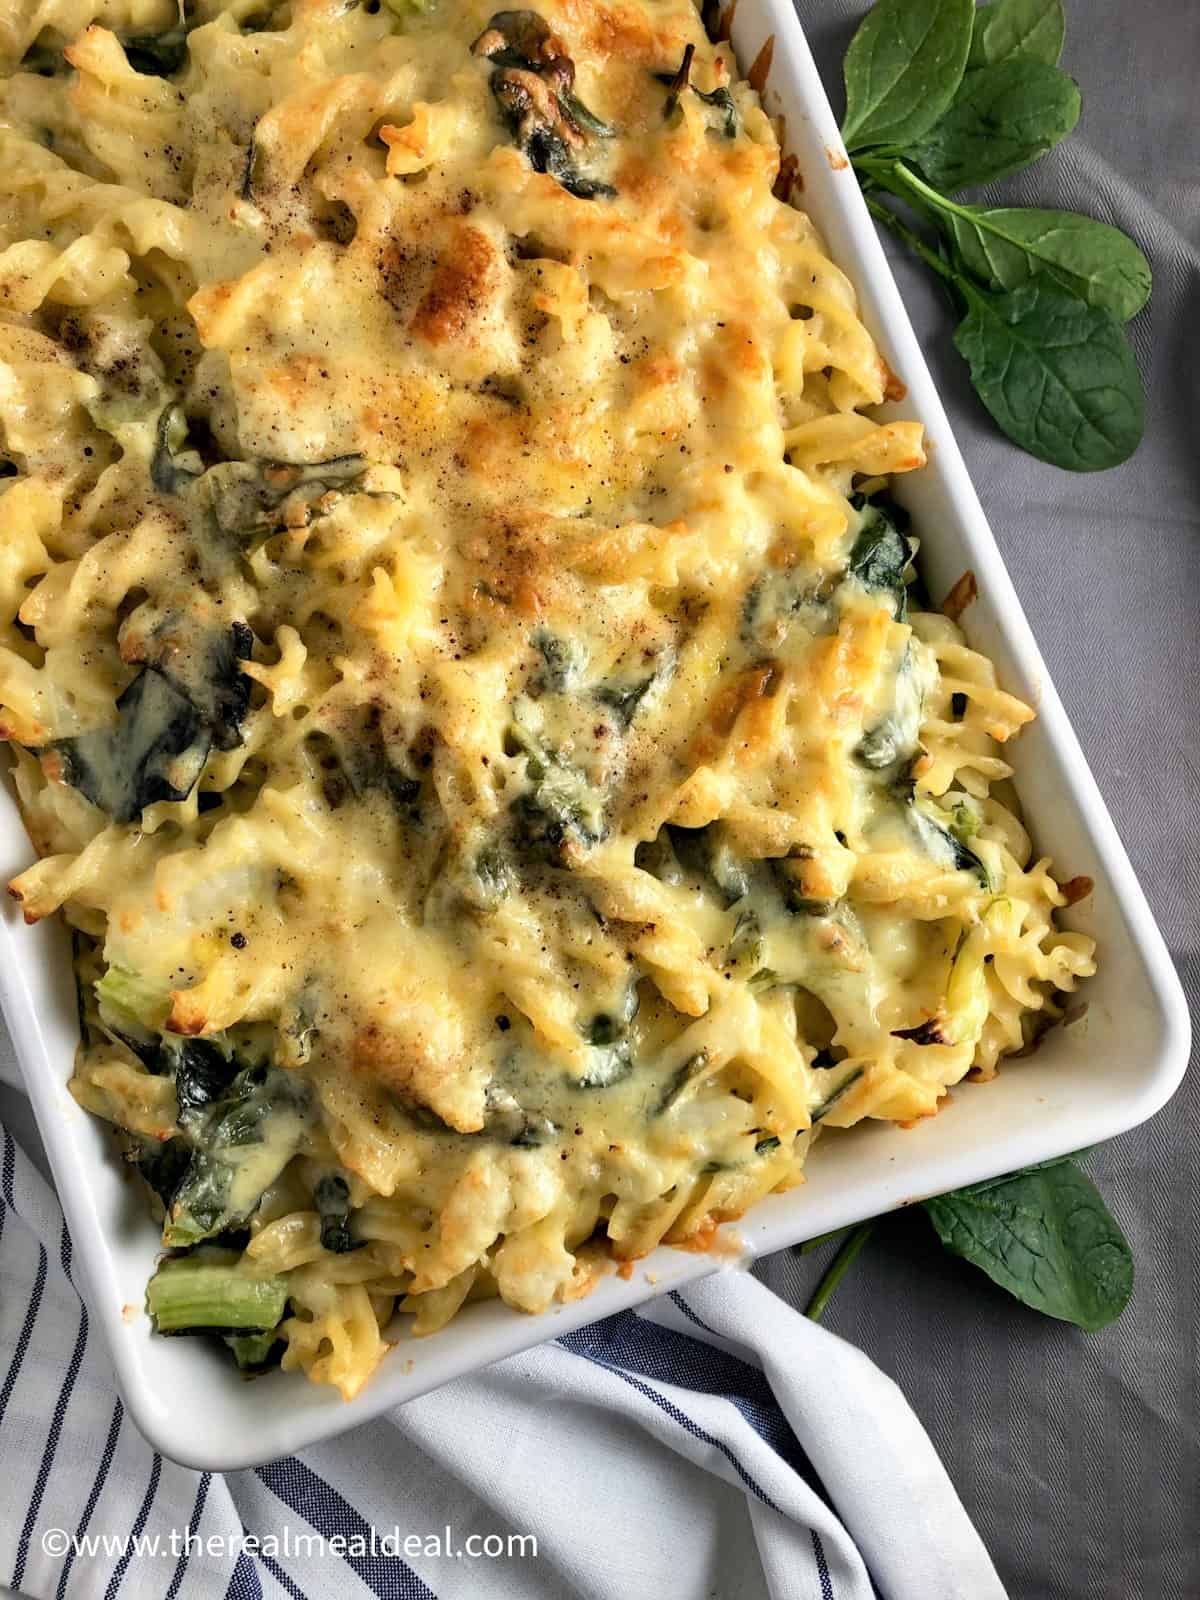 pasta bake with cauliflower cheese and spinach in dish just out of the oven